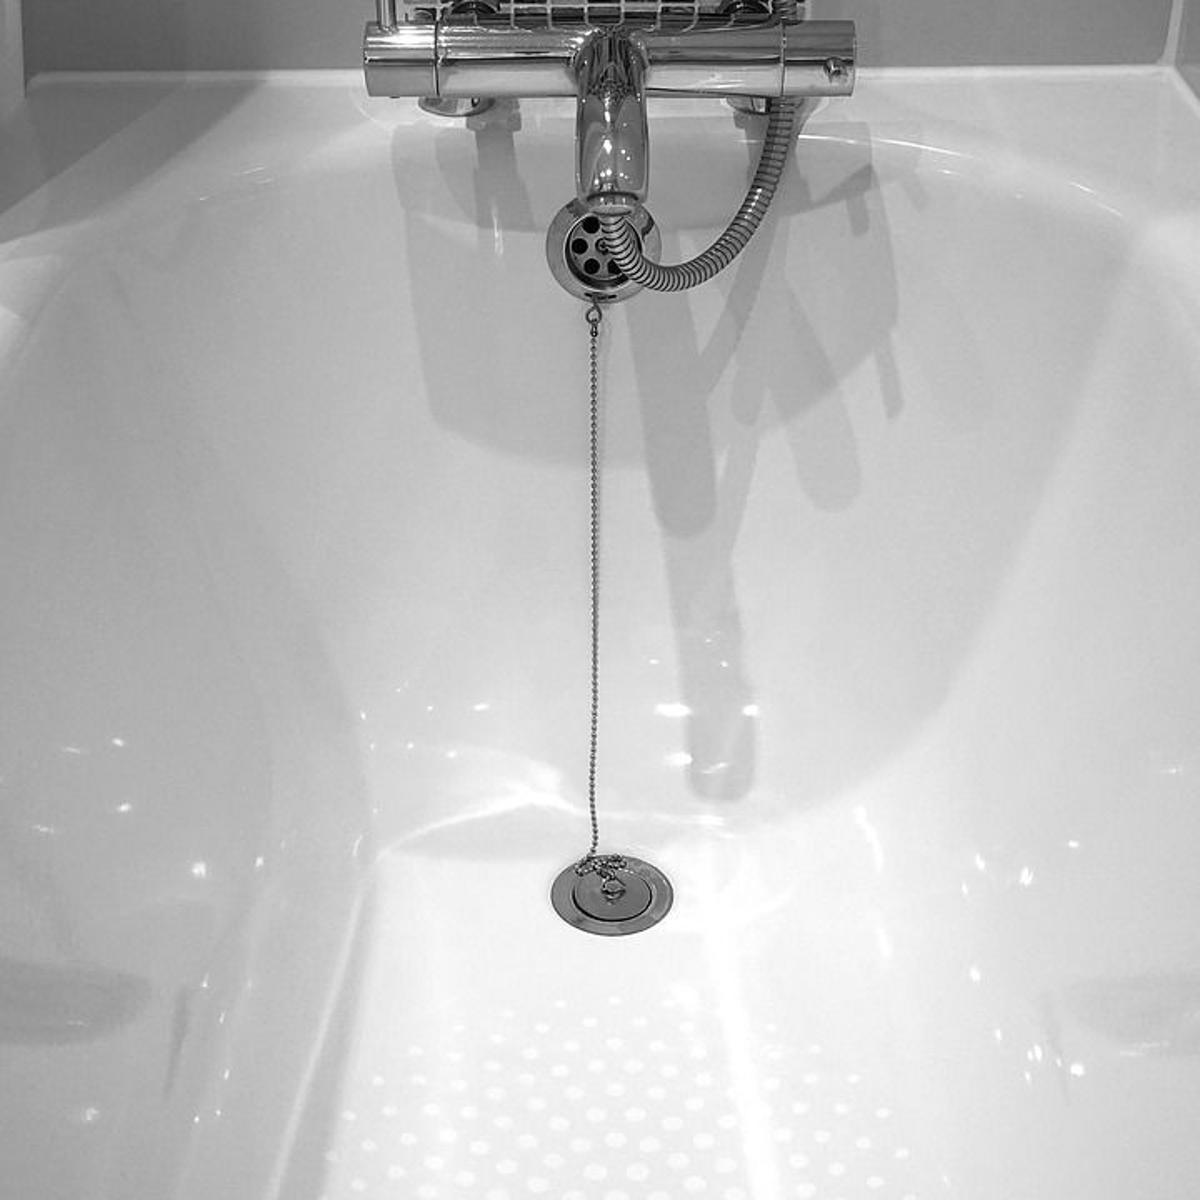 3 Caulking Secrets From The Pros Home, Easy Way To Remove Caulking From Bathtub